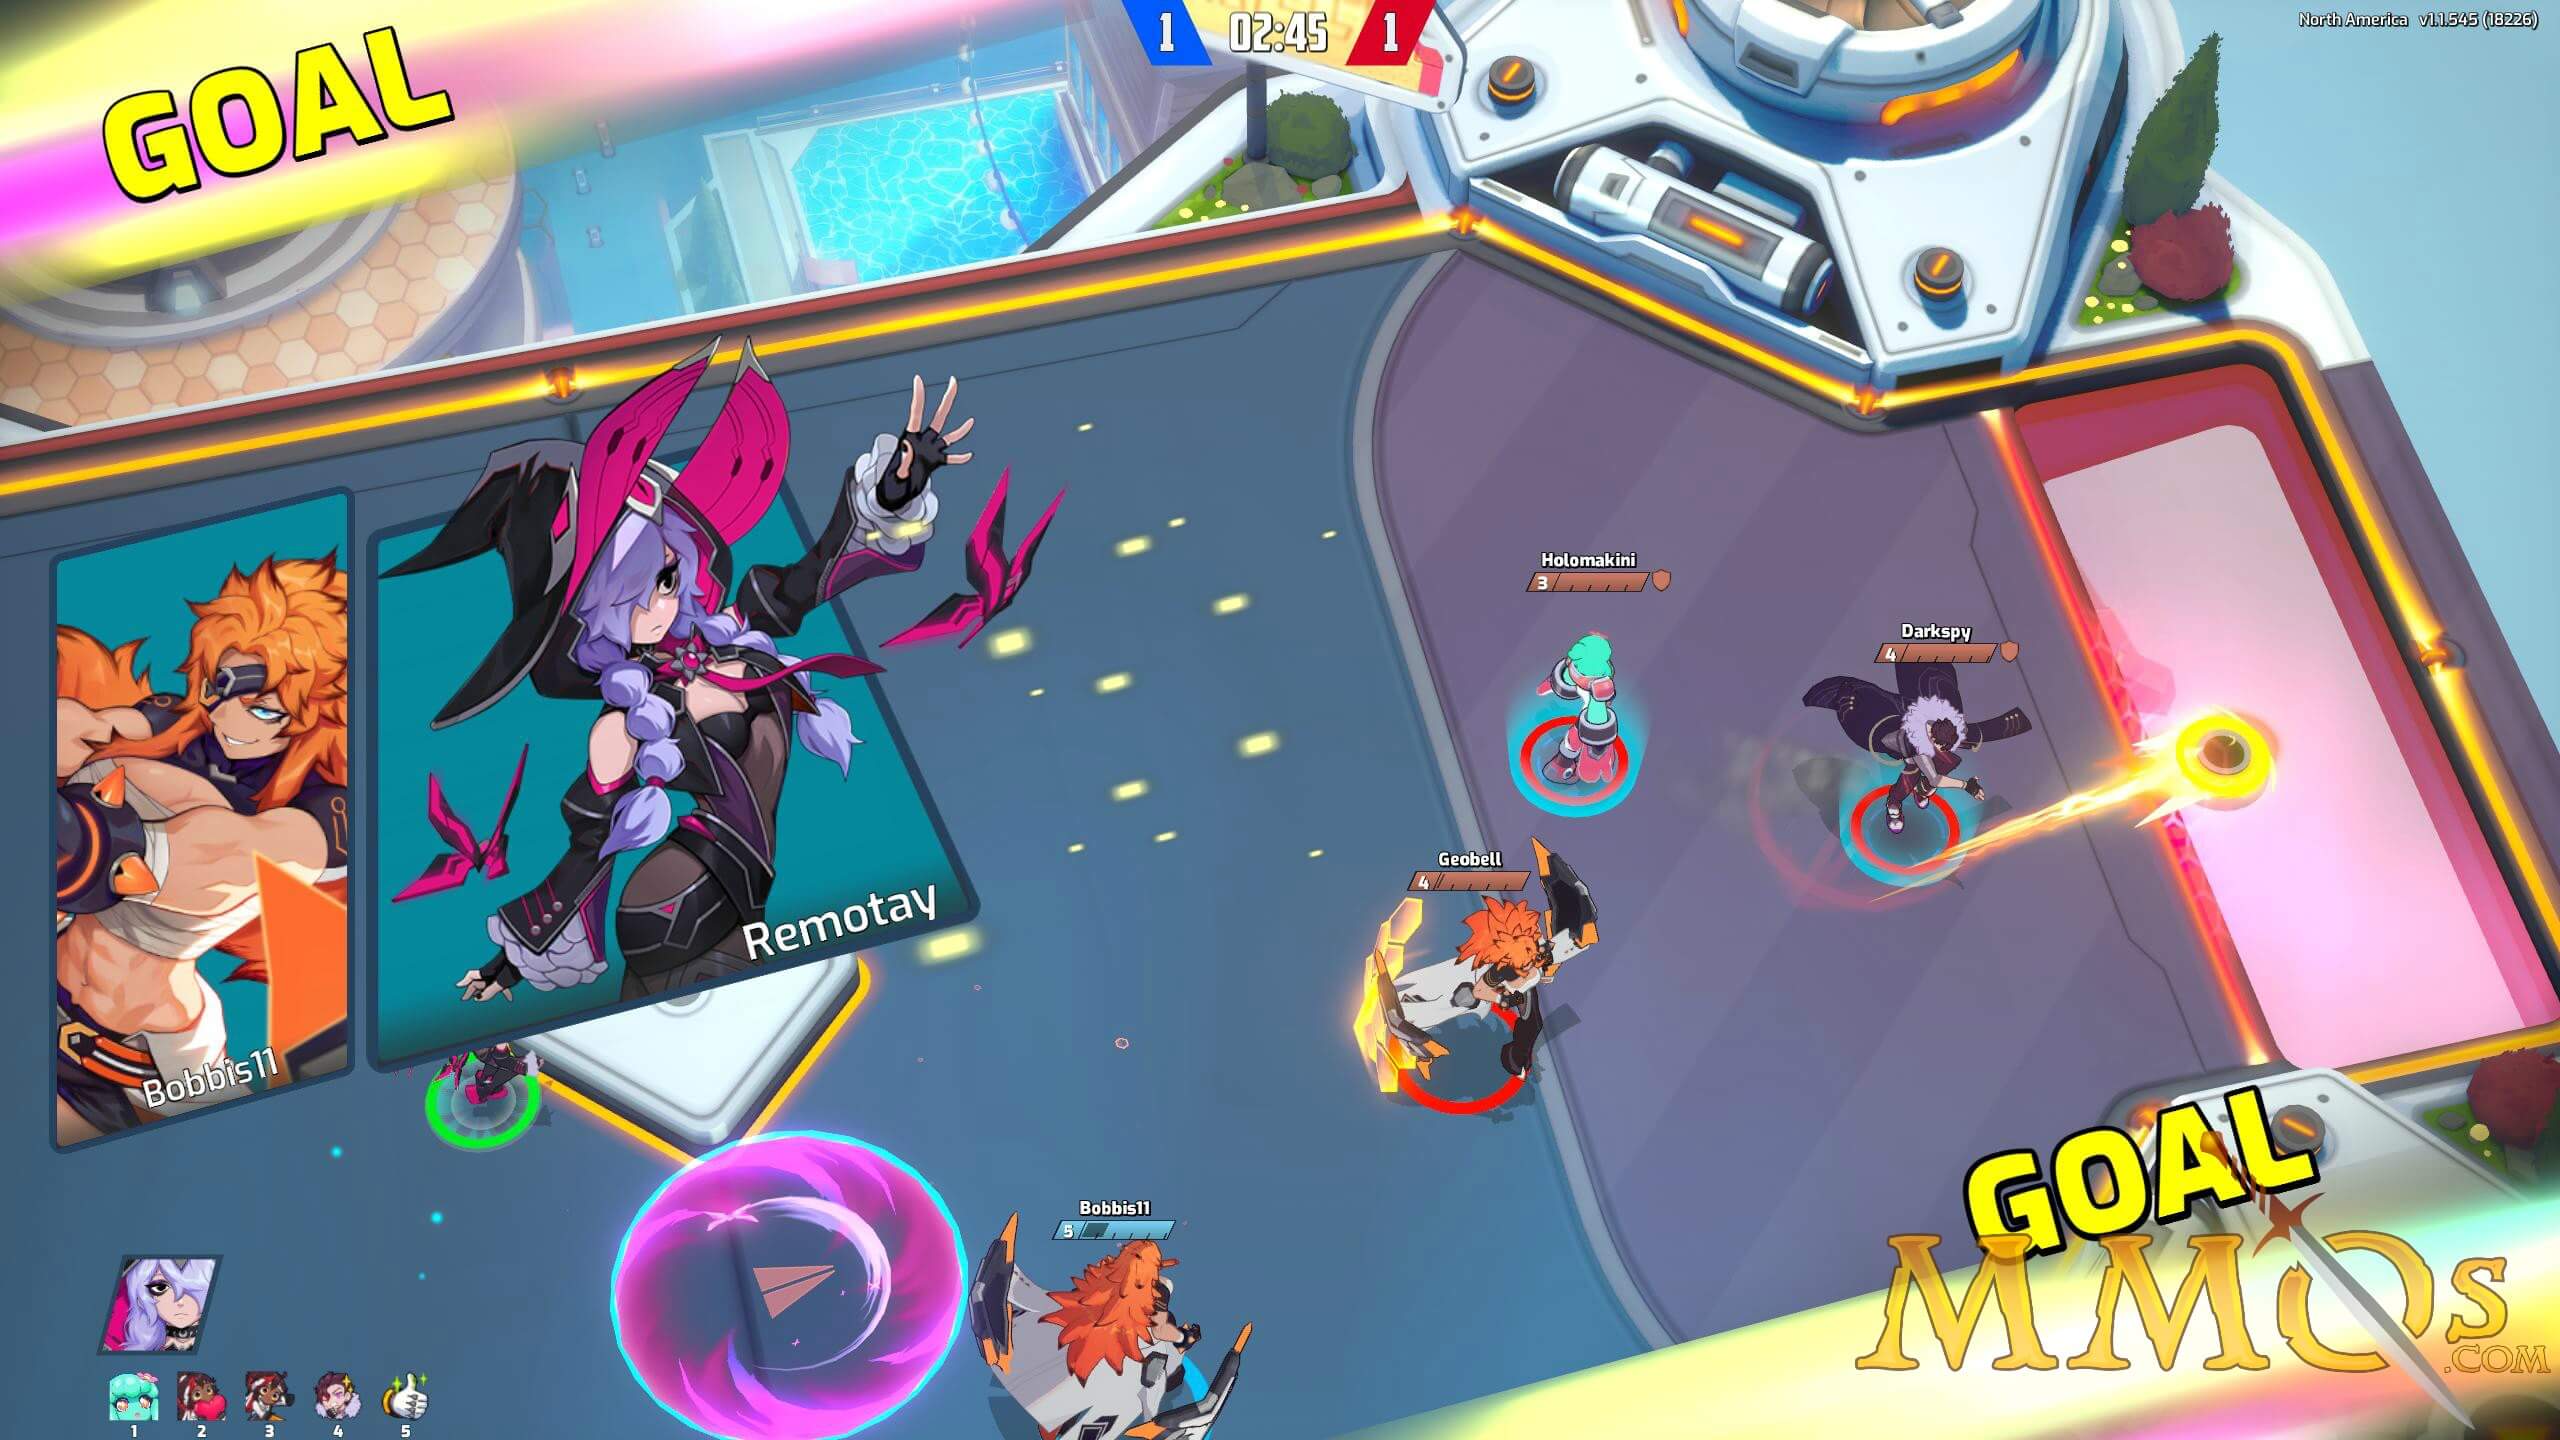 Omega Strikers Review - mxdwn Games